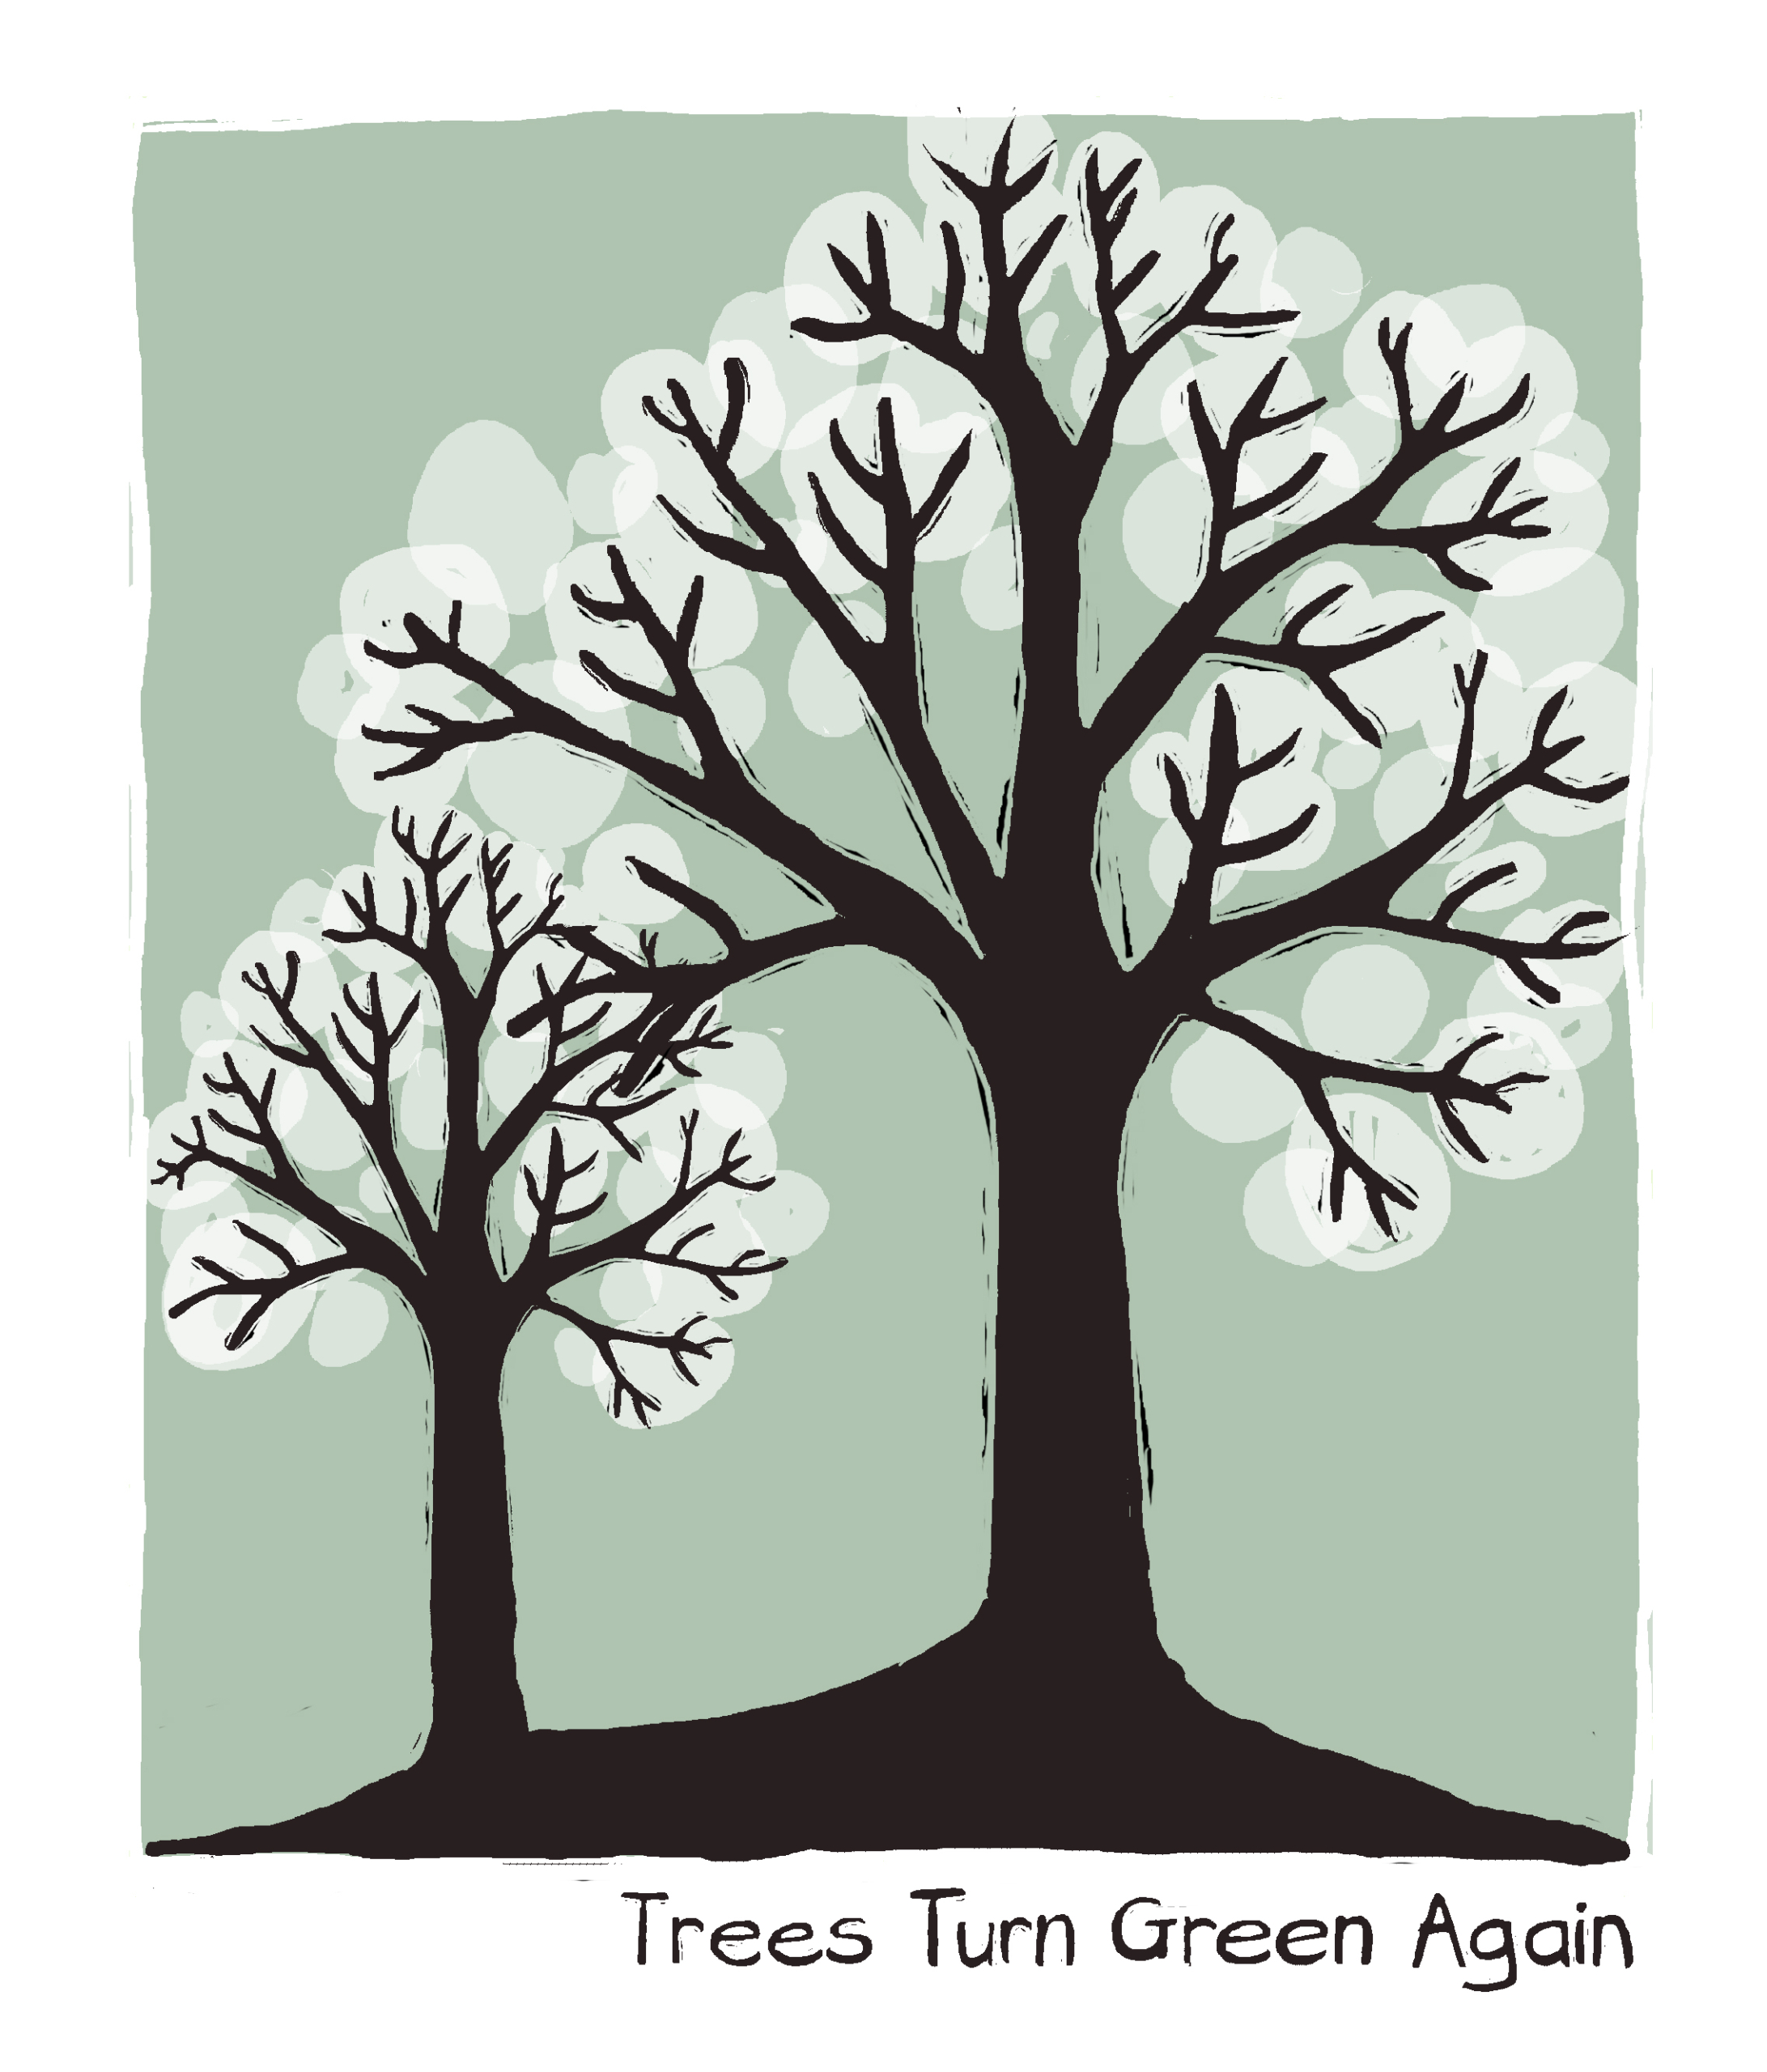 Drawing of two trees silhouetted against a plain green background